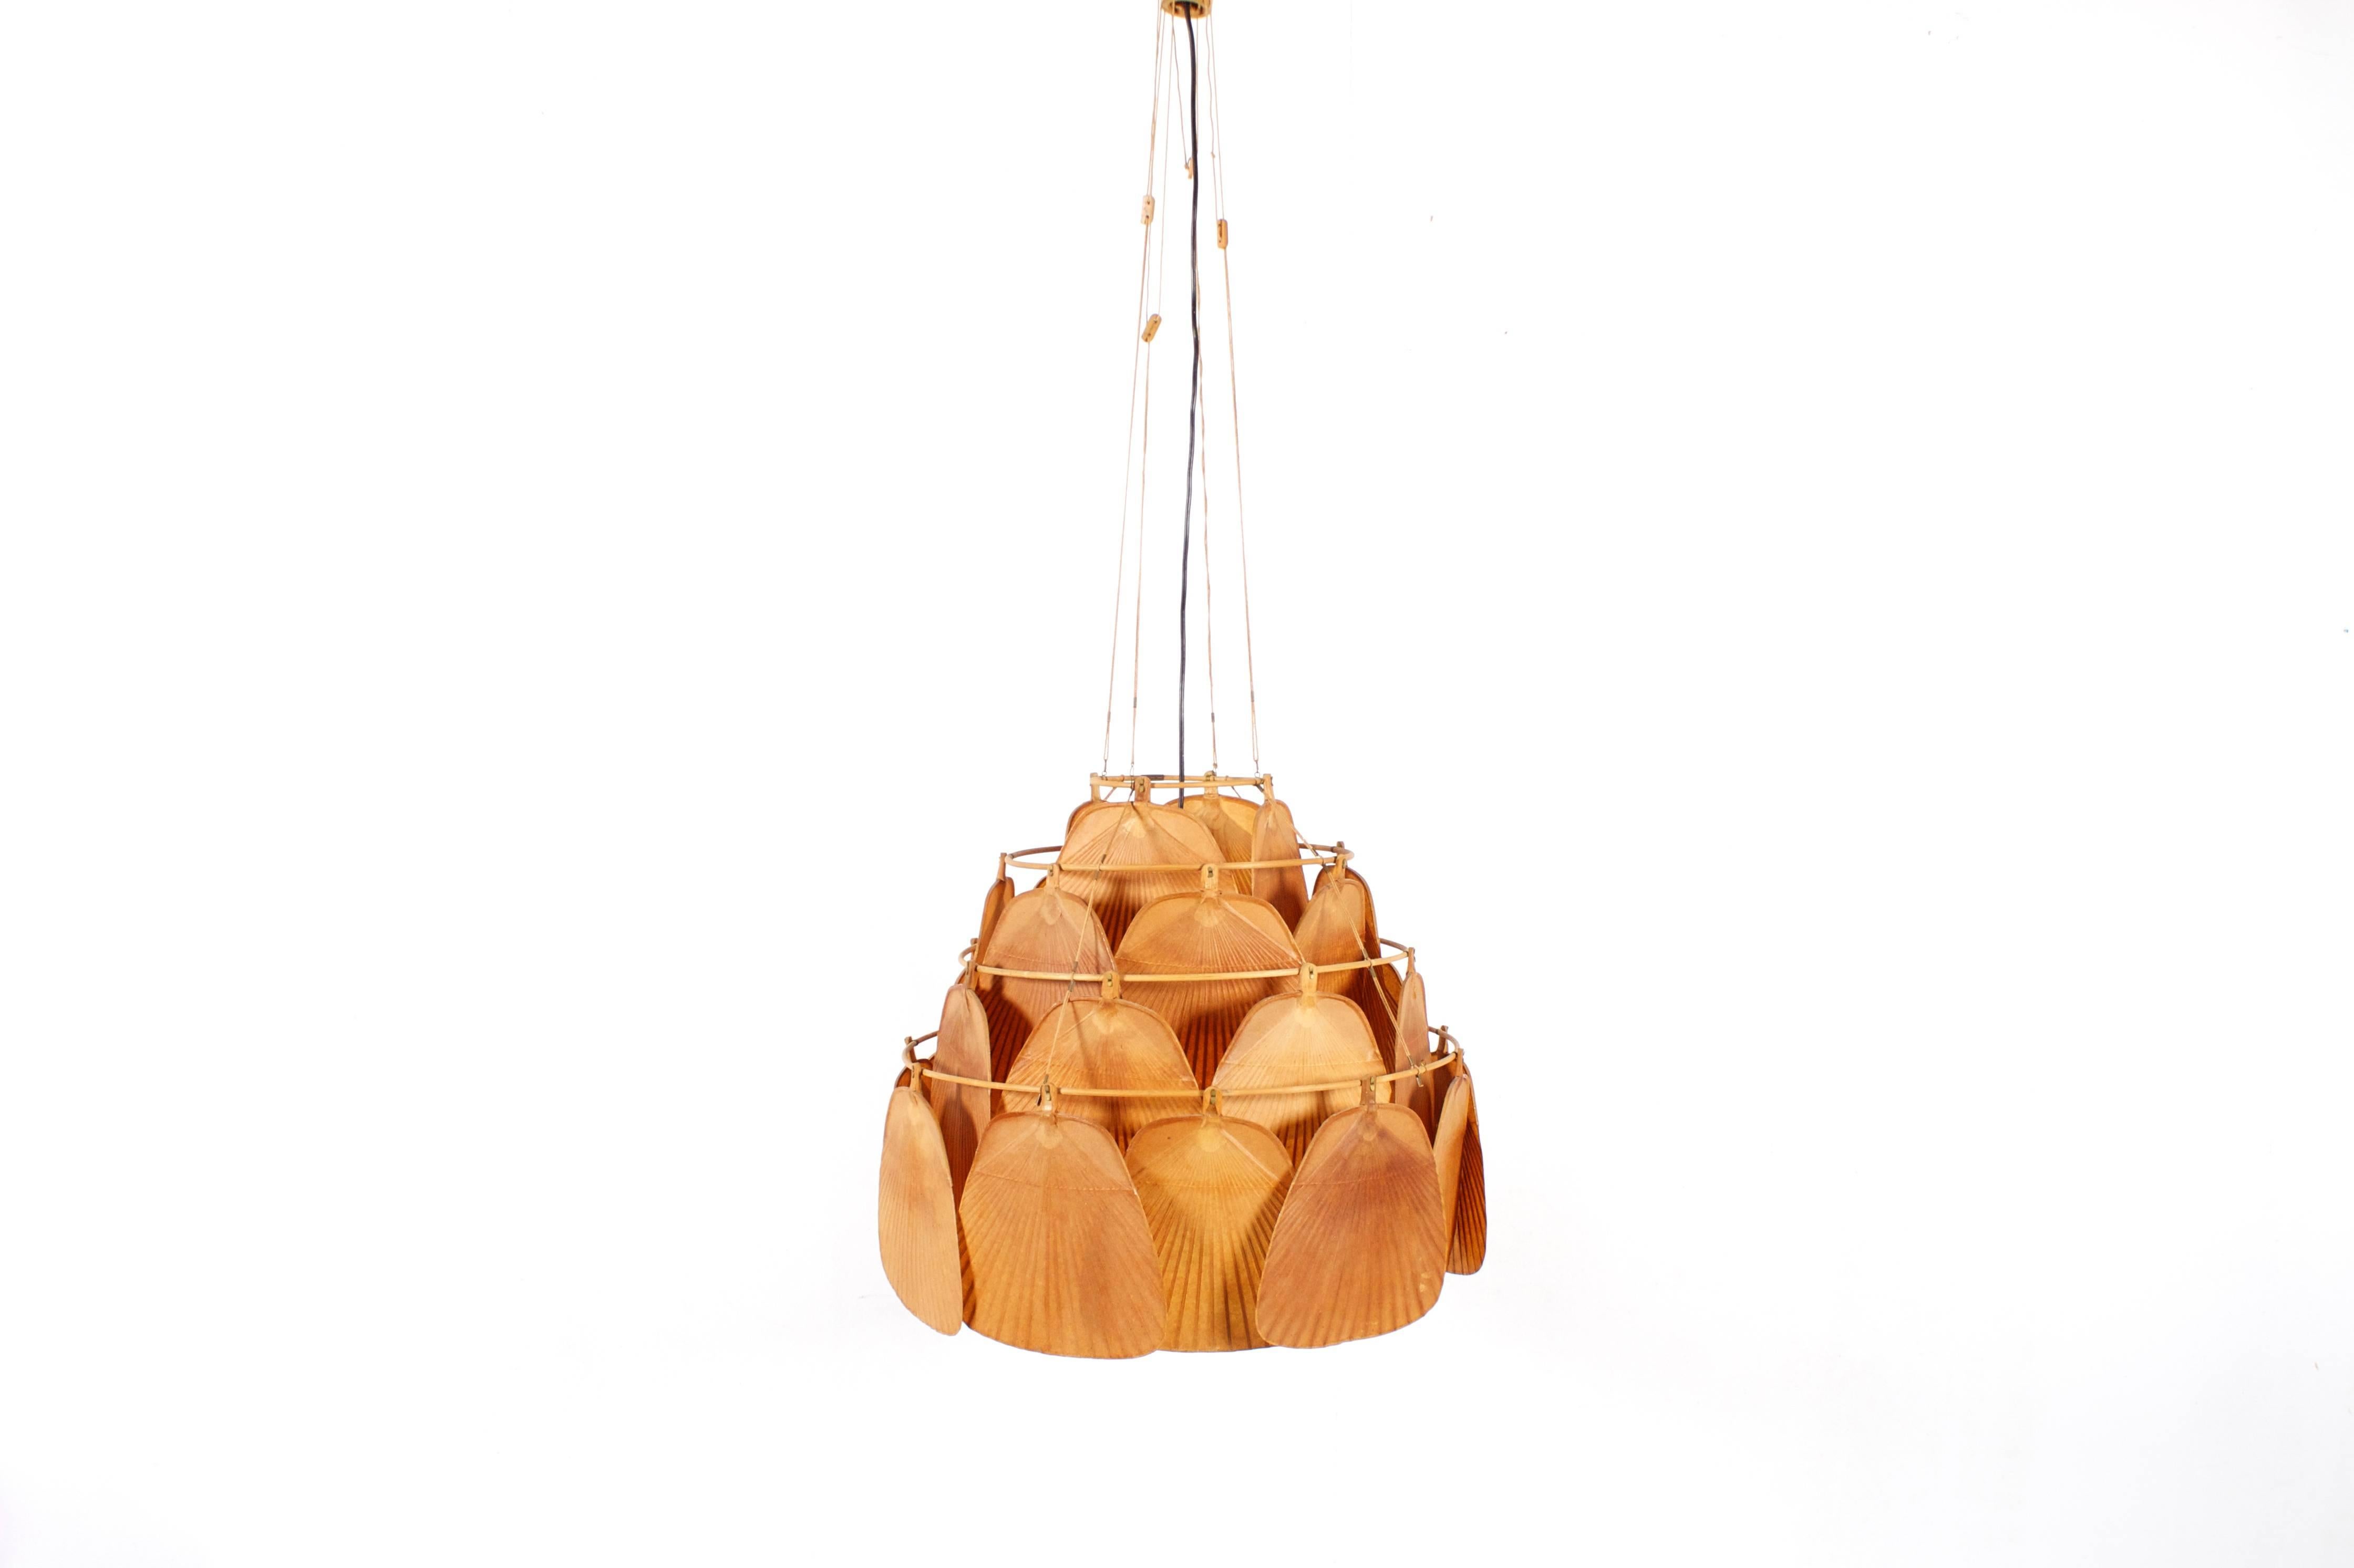 Largest version of the Uchiwa fan chandelier in very good original condition.

Designed by Ingo Maurer for M design, Germany.

This lamp is handmade from bamboo and Japanese rice paper. 

The lamp consists of 30 fans hanging from a four-tier